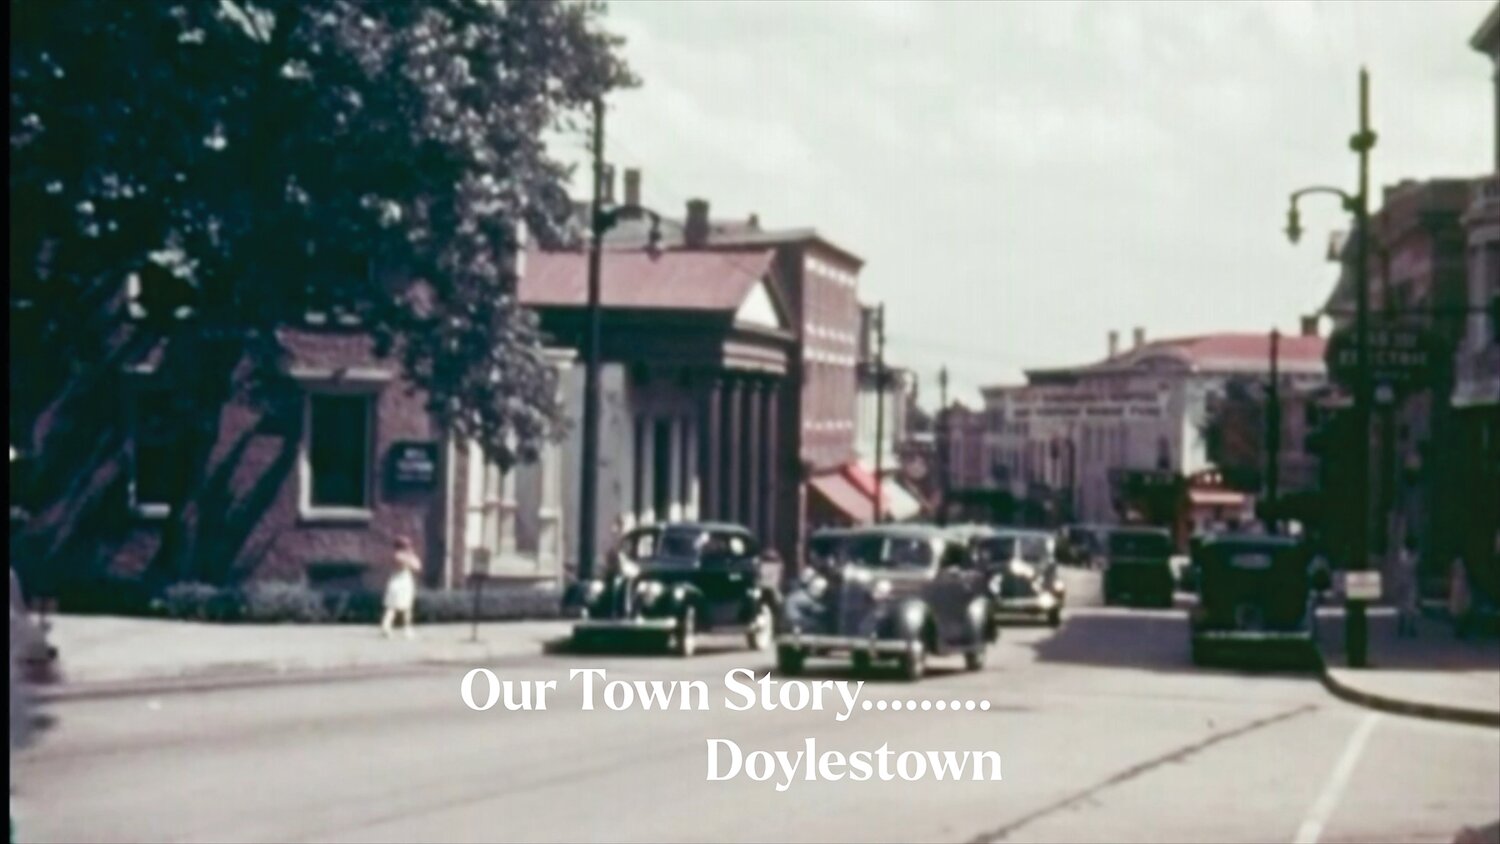 A clip from “Our Town Story...Doylestown, screening Oct. 12.